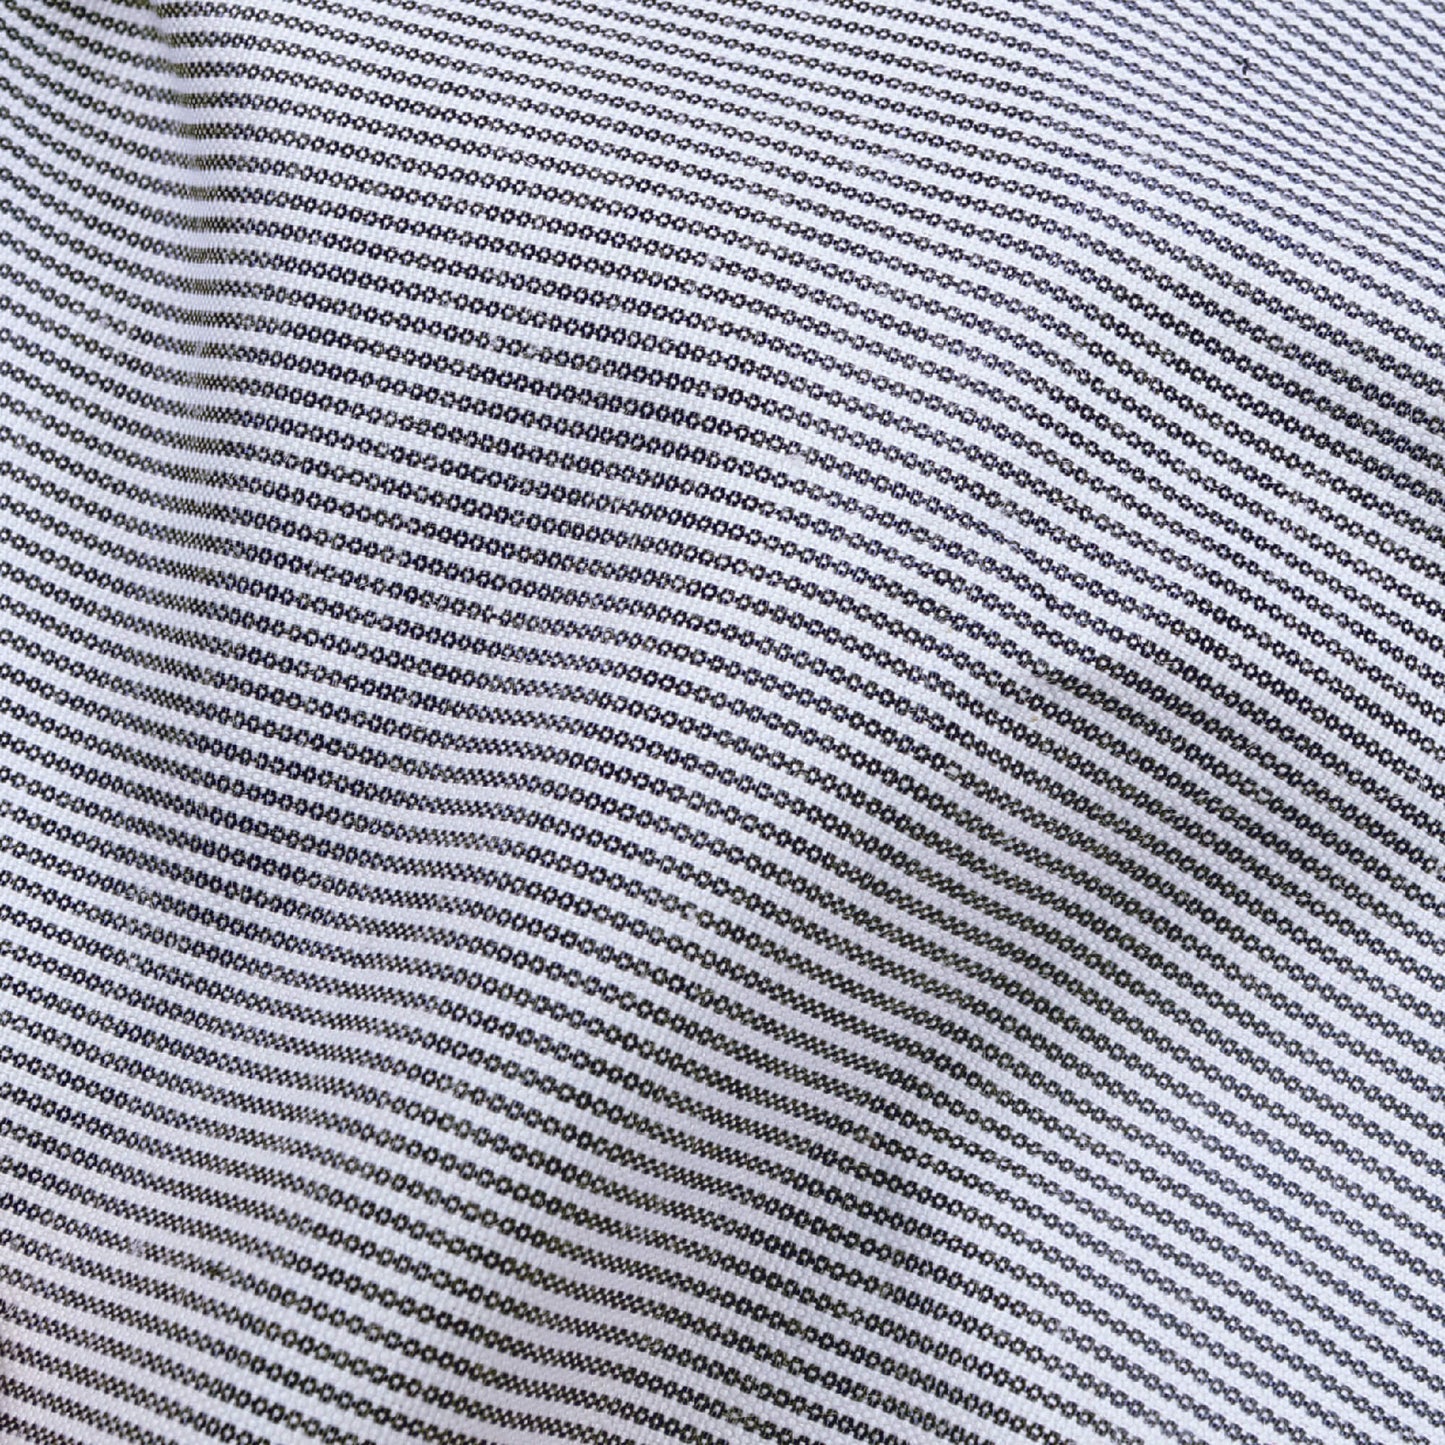 Black And White Stripes Pattern Yarn Dyed Exclusive Shirting Fabric (Width 58 Inches)